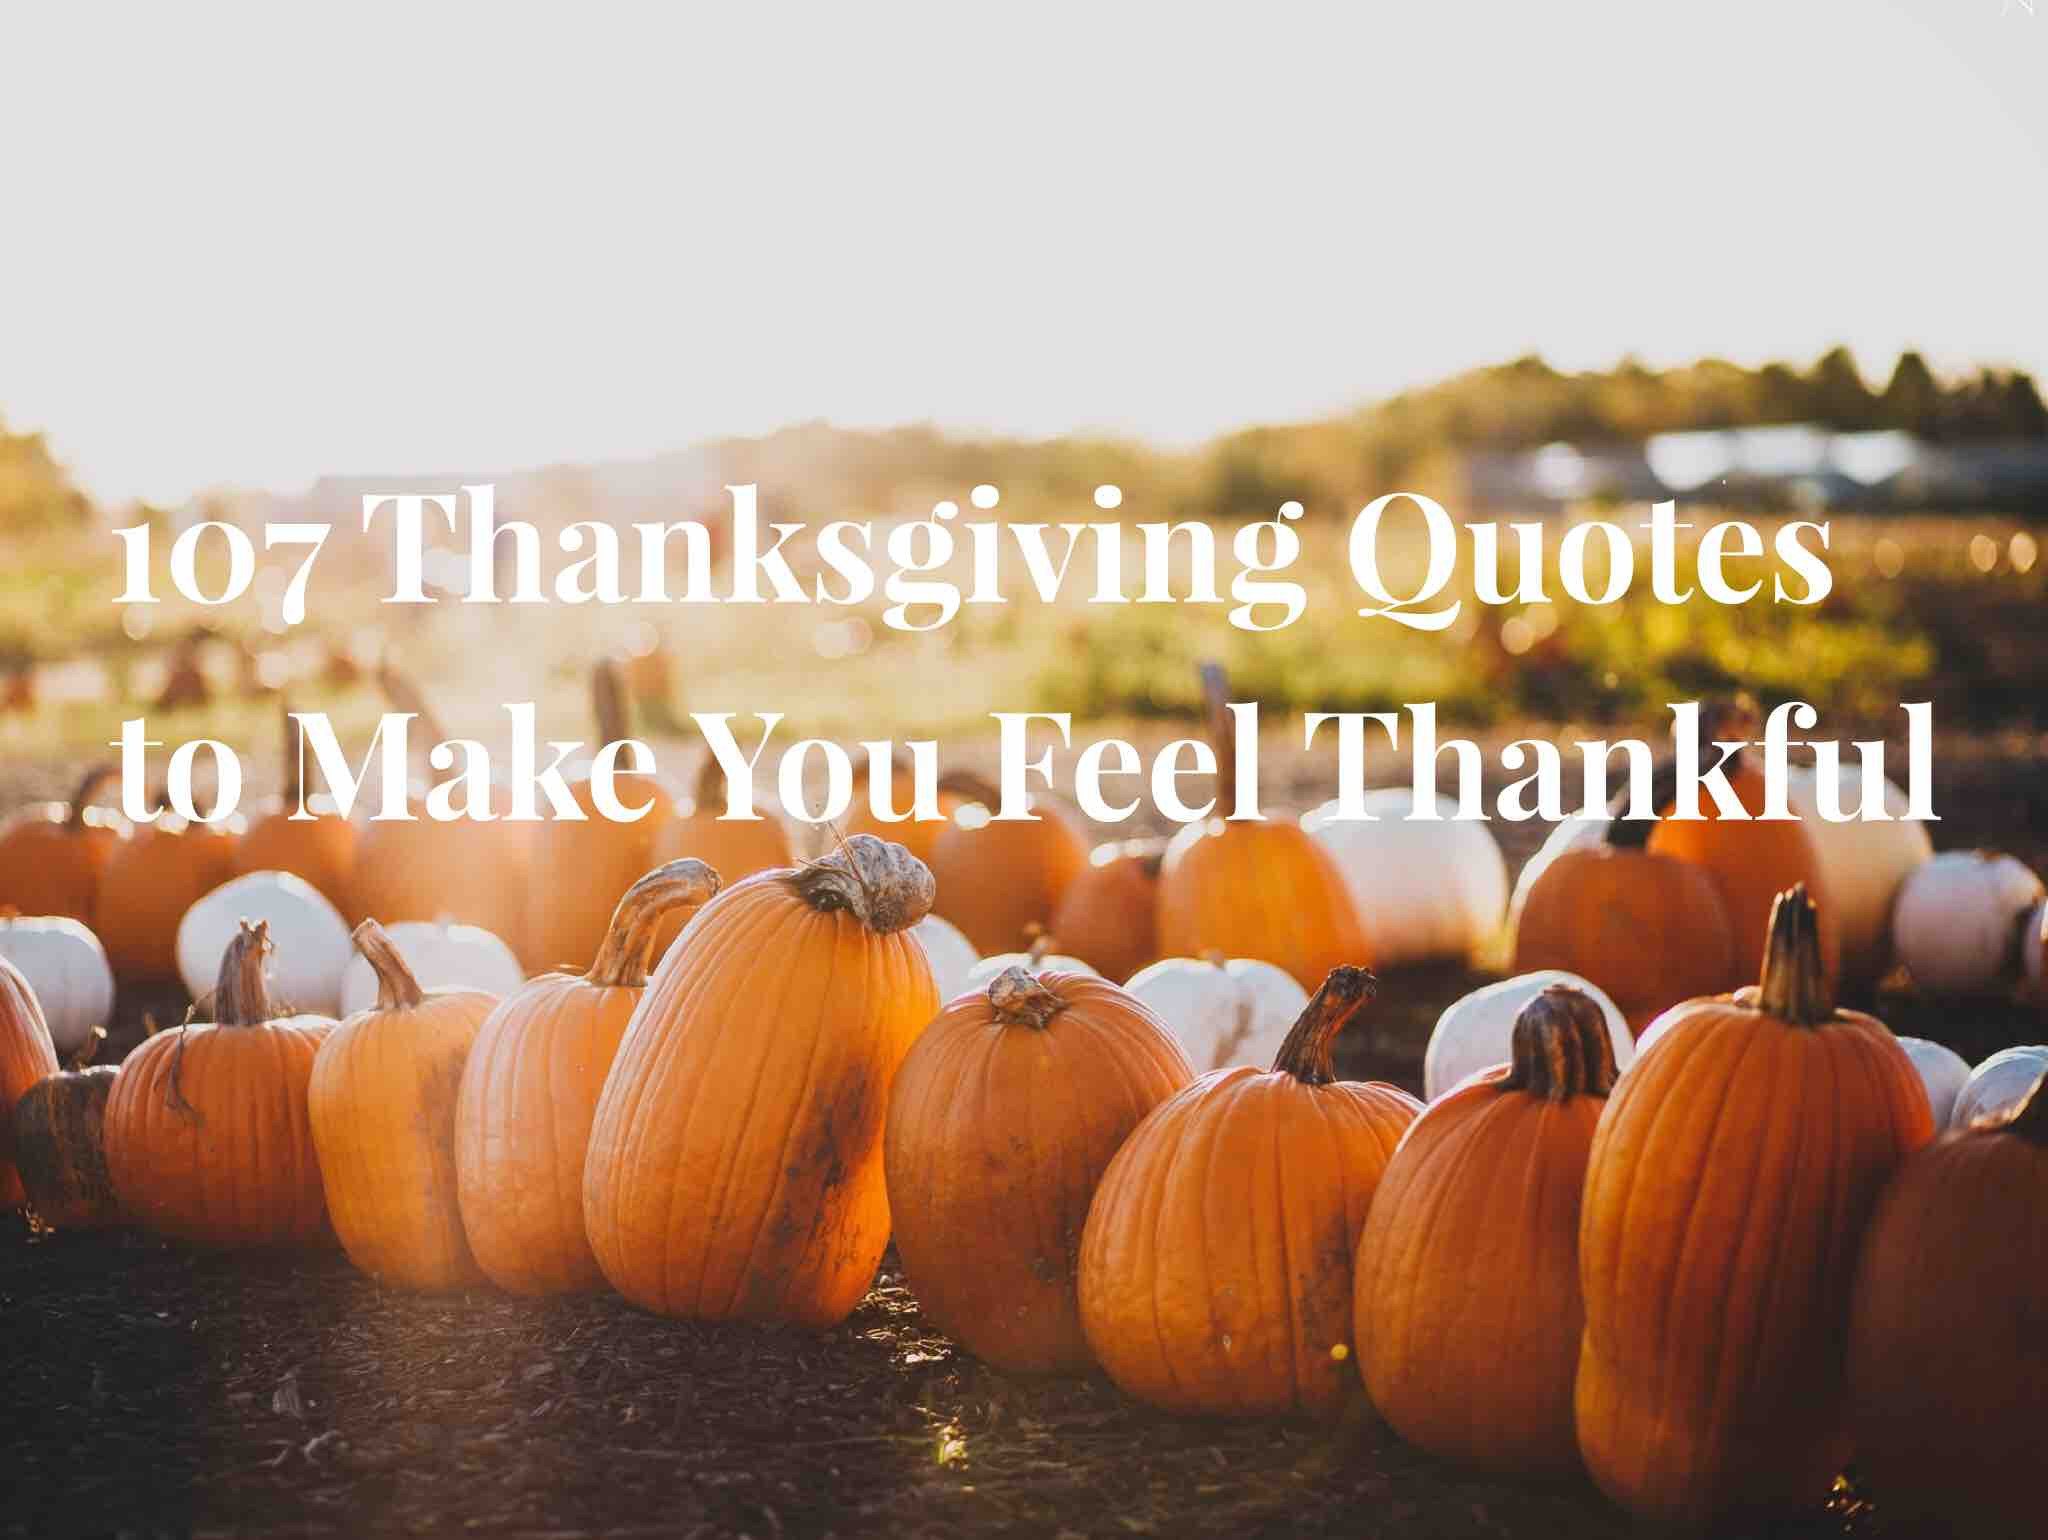 Grateful Thanksgiving Quotes
 107 Thanksgiving Quotes to Make You Feel Thankful